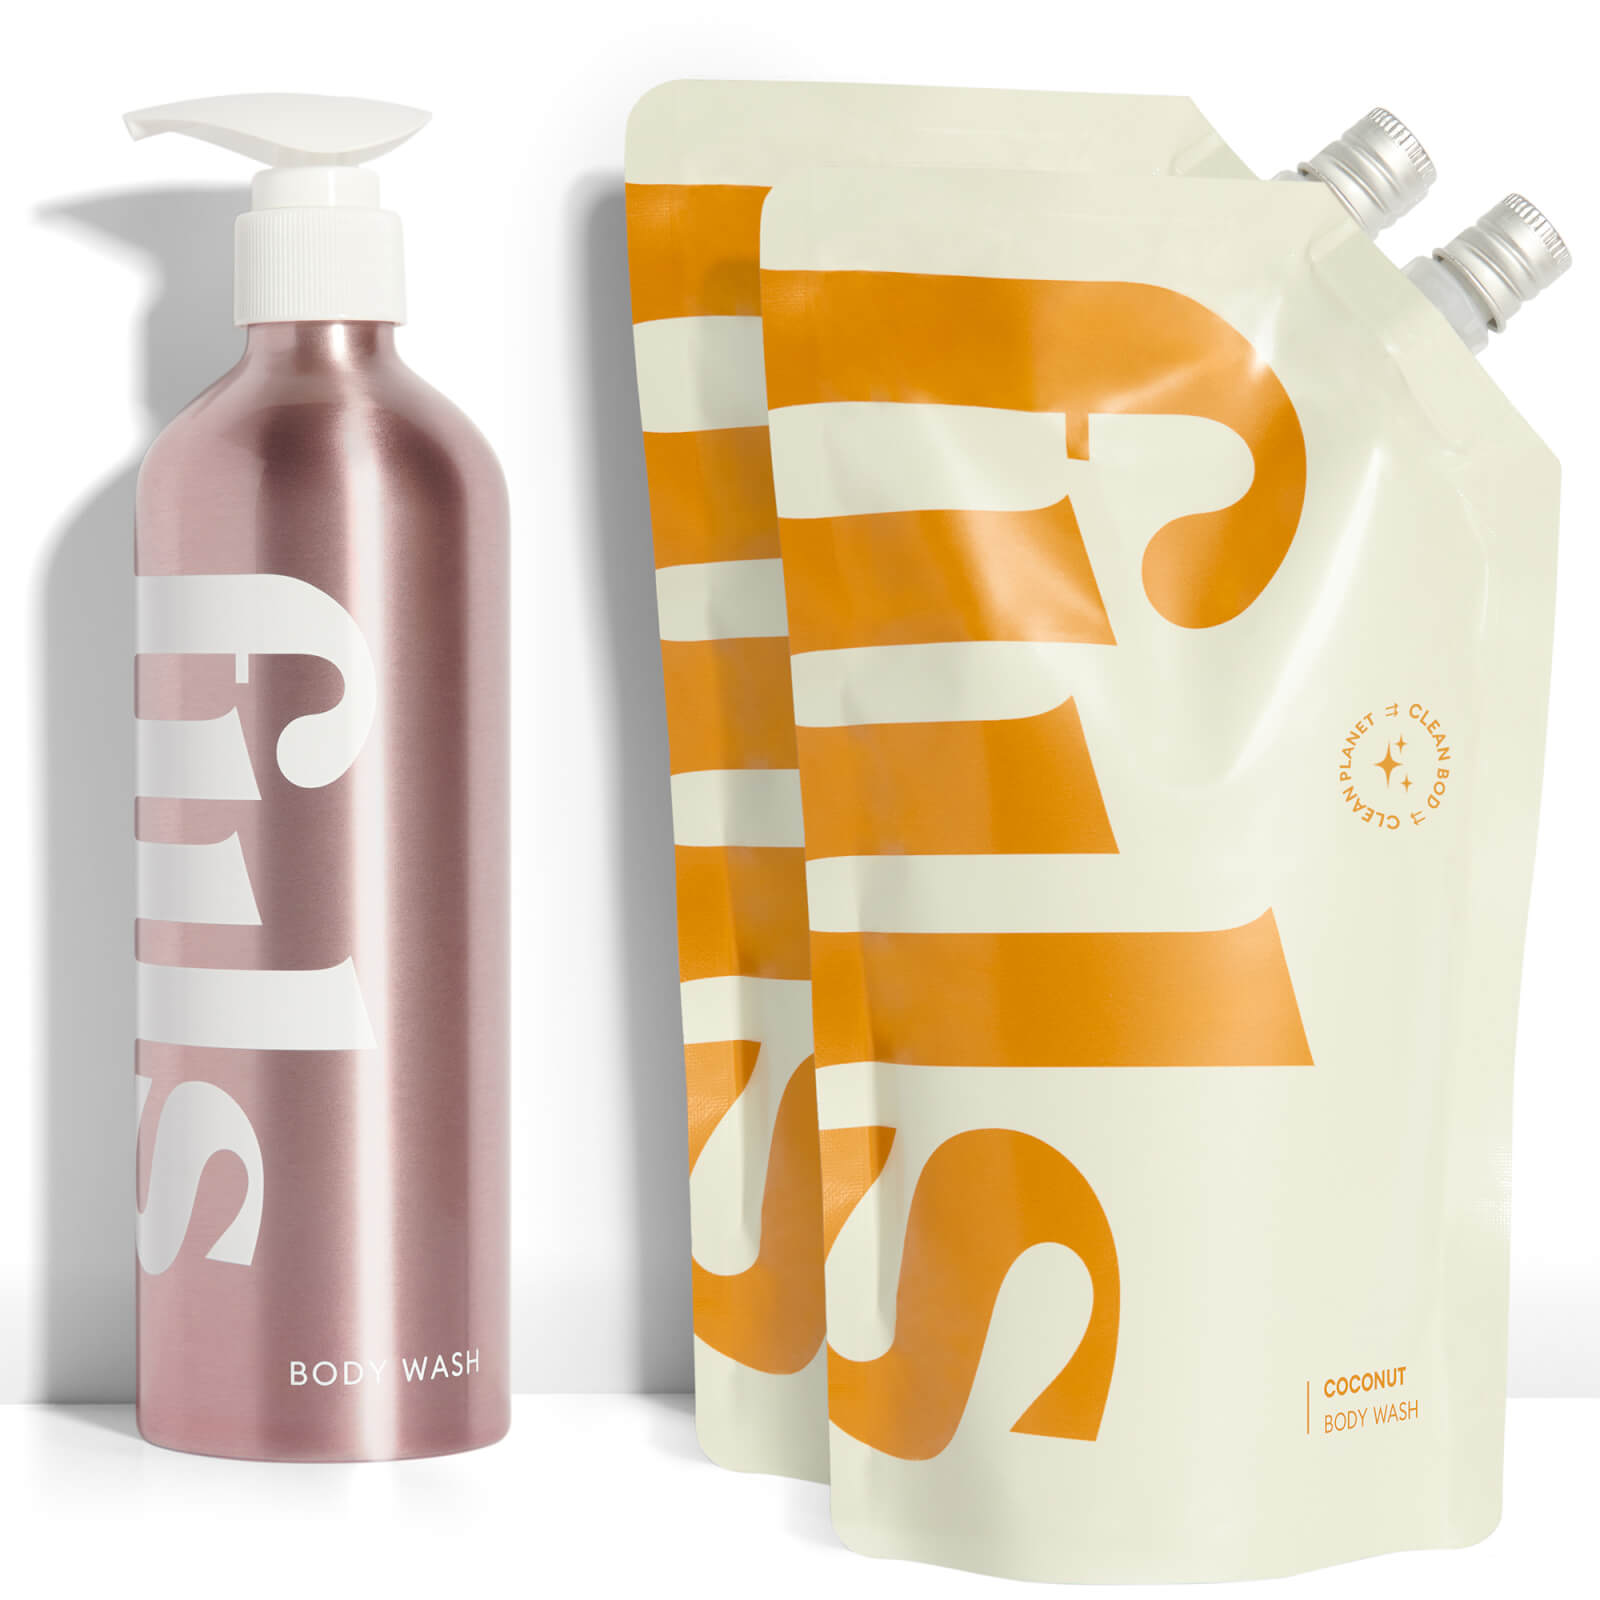 fiils The Coconut Body Wash Kit (Various Options) - Rose Gold